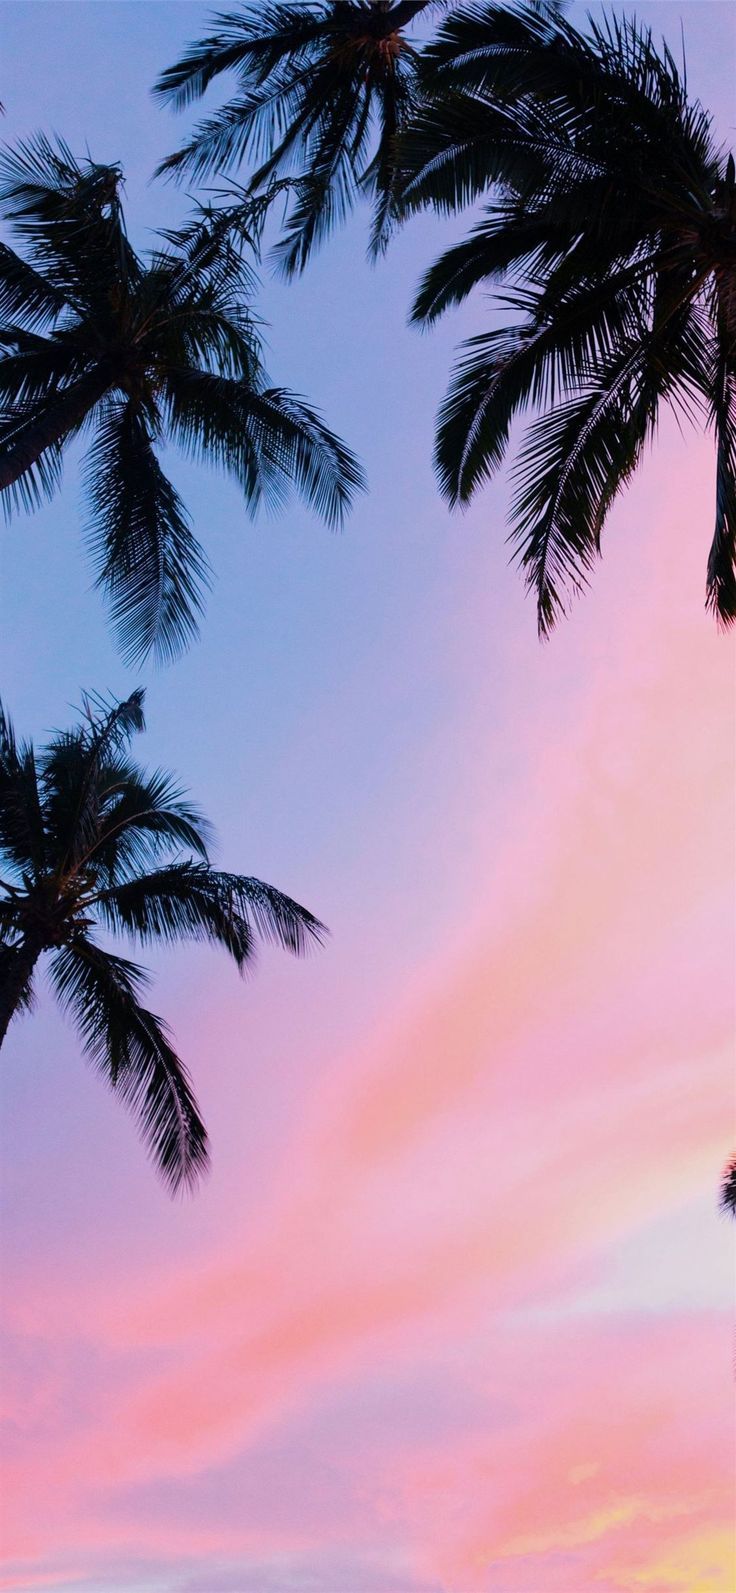 IPhone wallpaper of palm trees against a pink and blue sunset sky - Palm tree